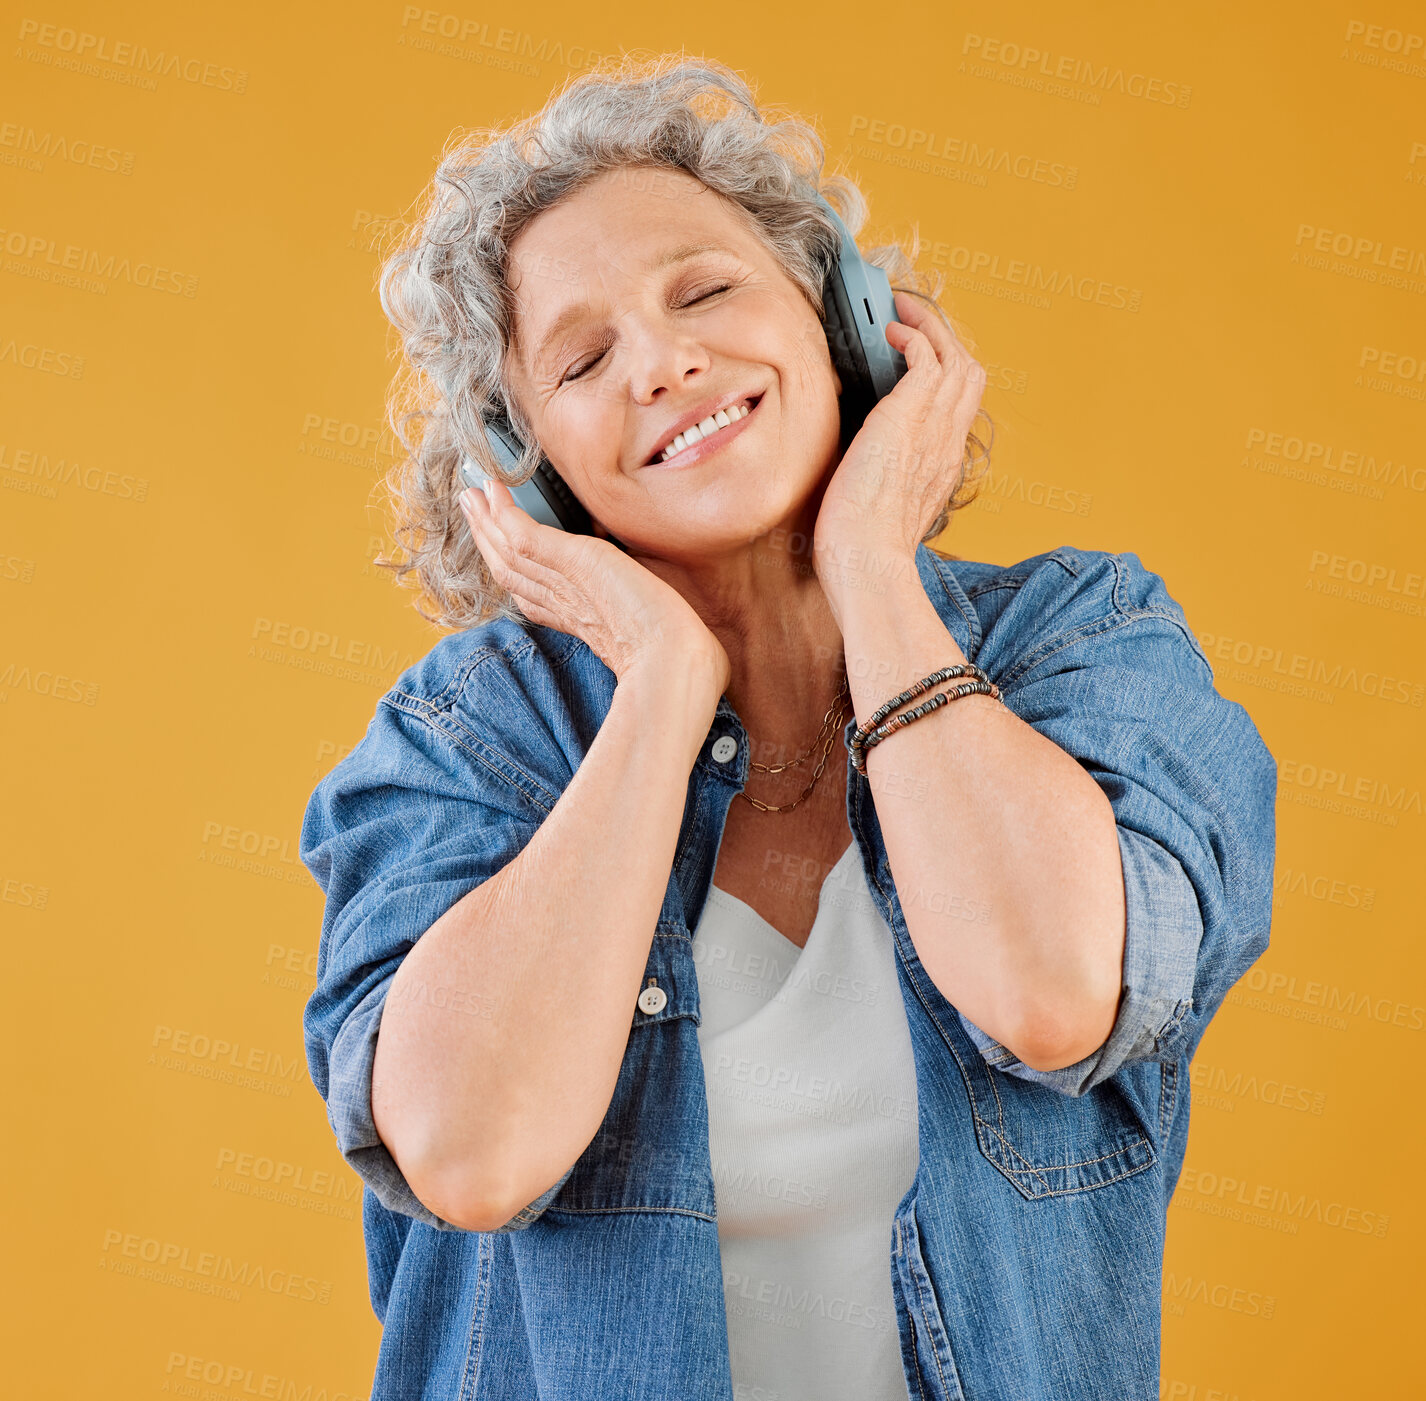 Buy stock photo One happy mature caucasian woman wearing headphones and listening to music while dancing against a yellow background in the studio. Smiling white woman feeling free while expressing through dance